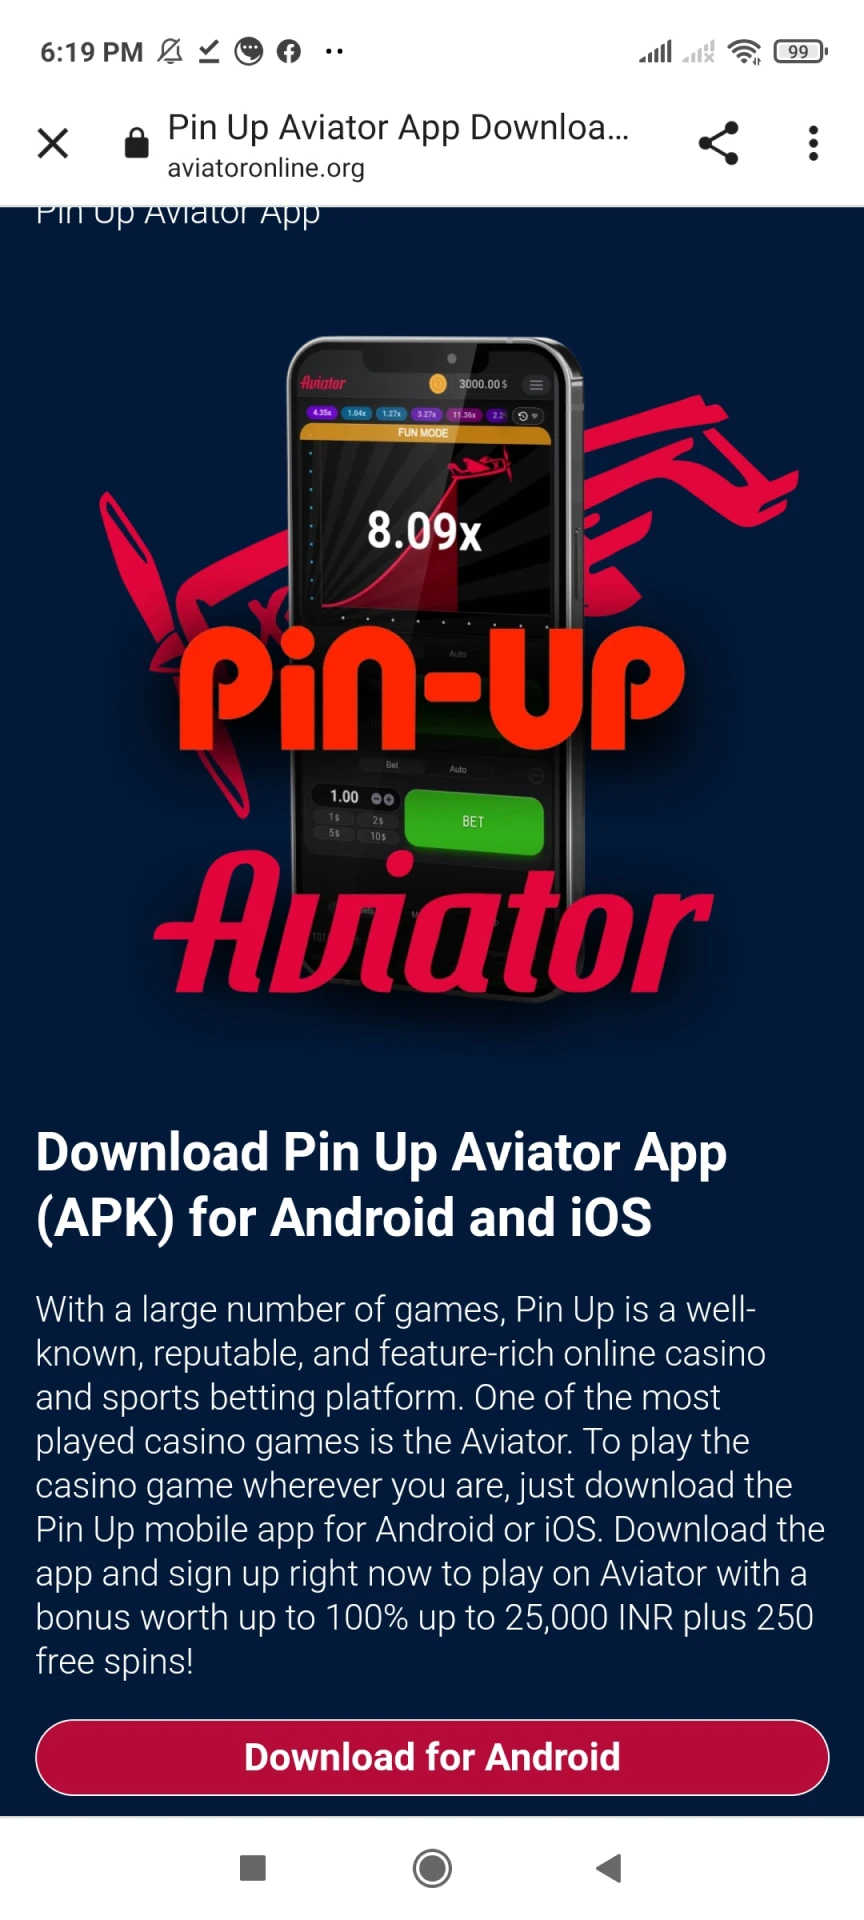 Follow the link to download the Pin Up apk for Android.